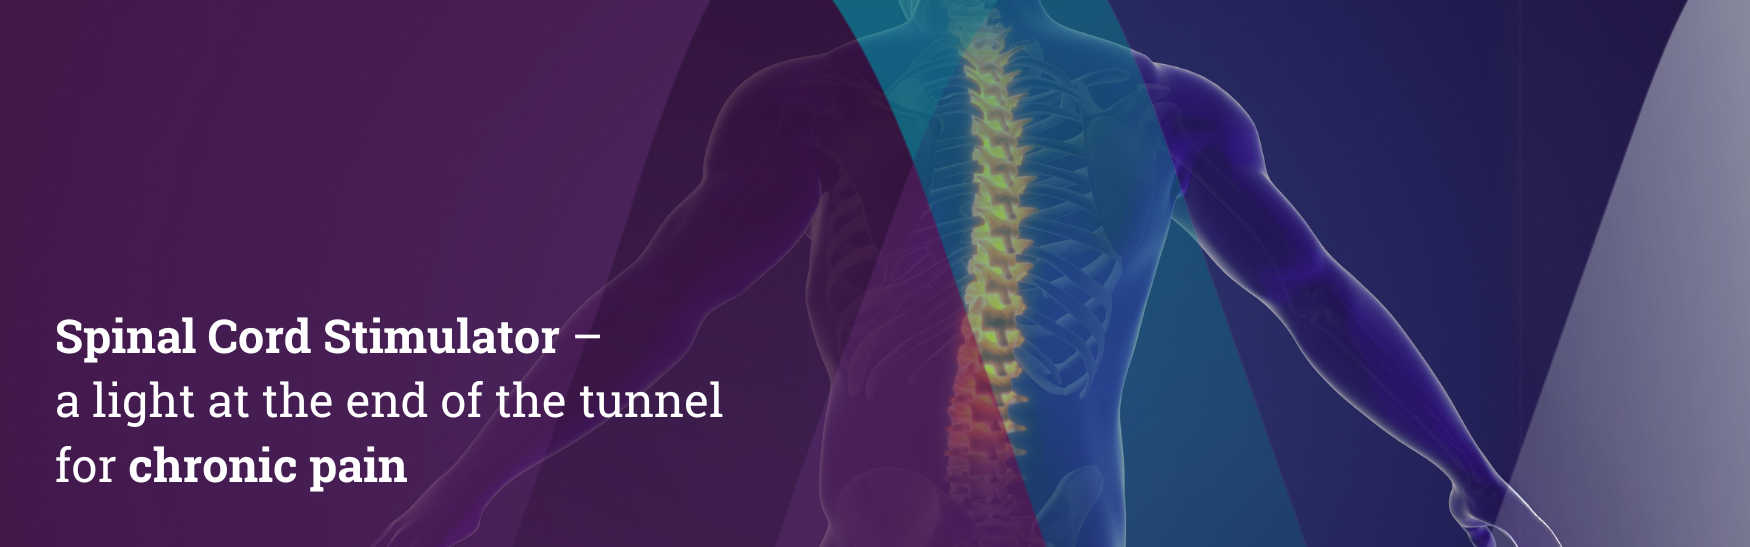 Spinal Cord Stimulator – a light at the end of the tunnel for chronic pain